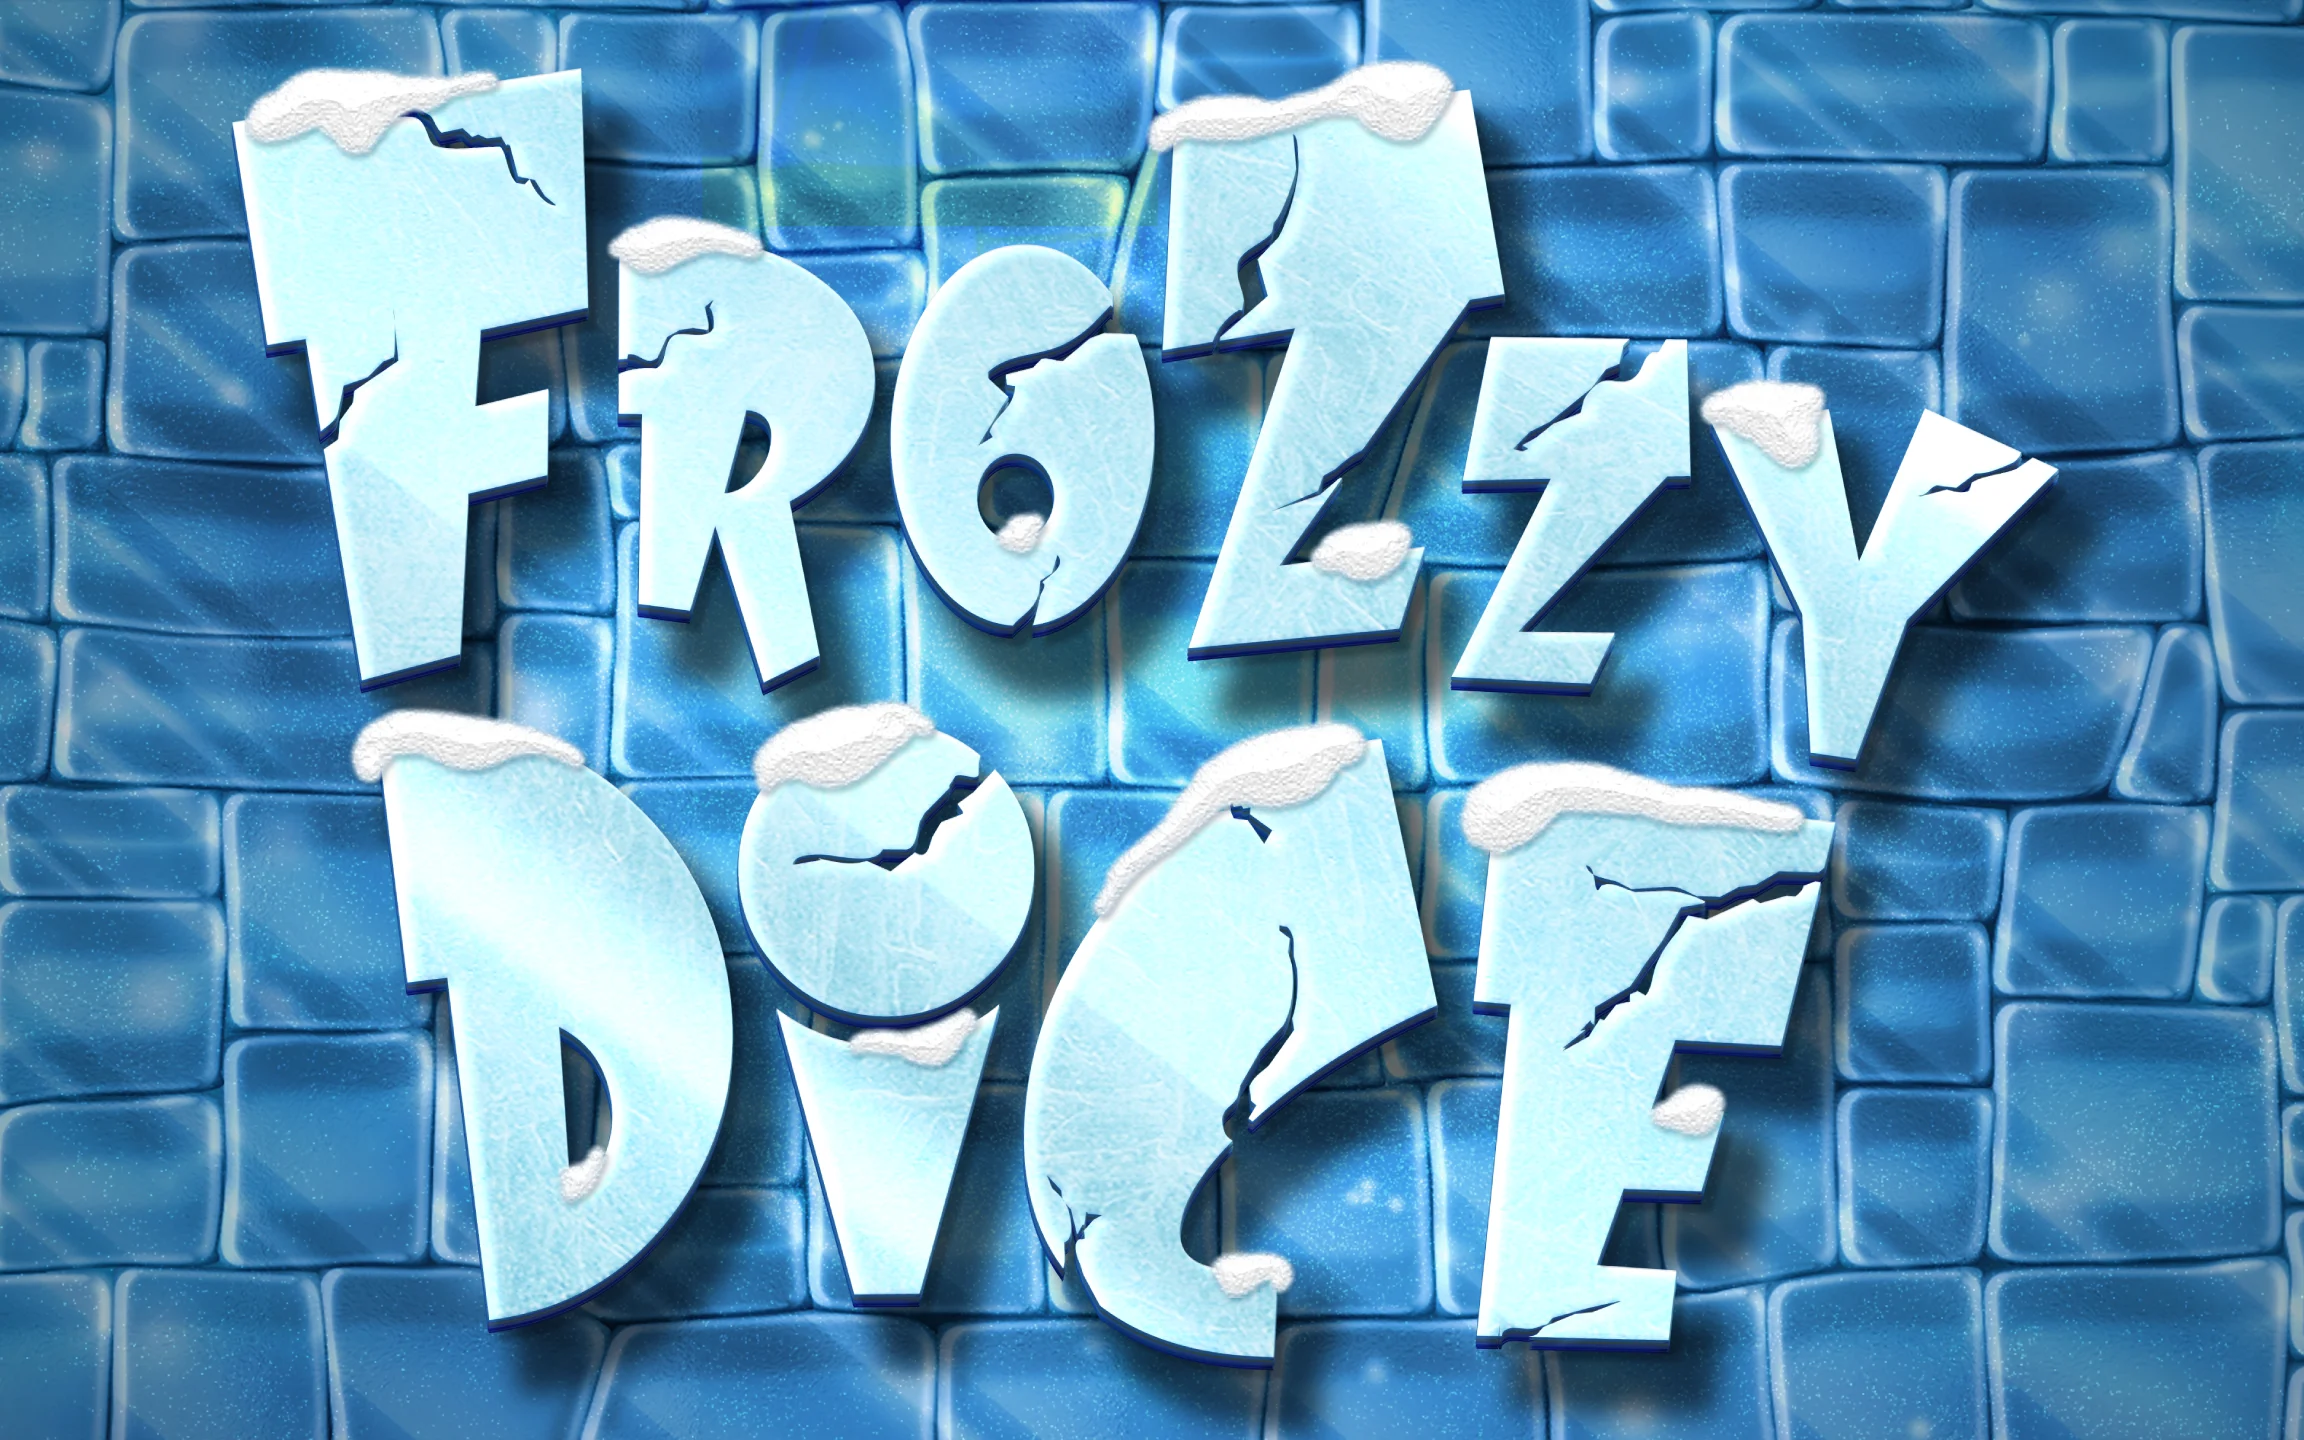 Play Frozzy Dice on Starcasino.be online casino